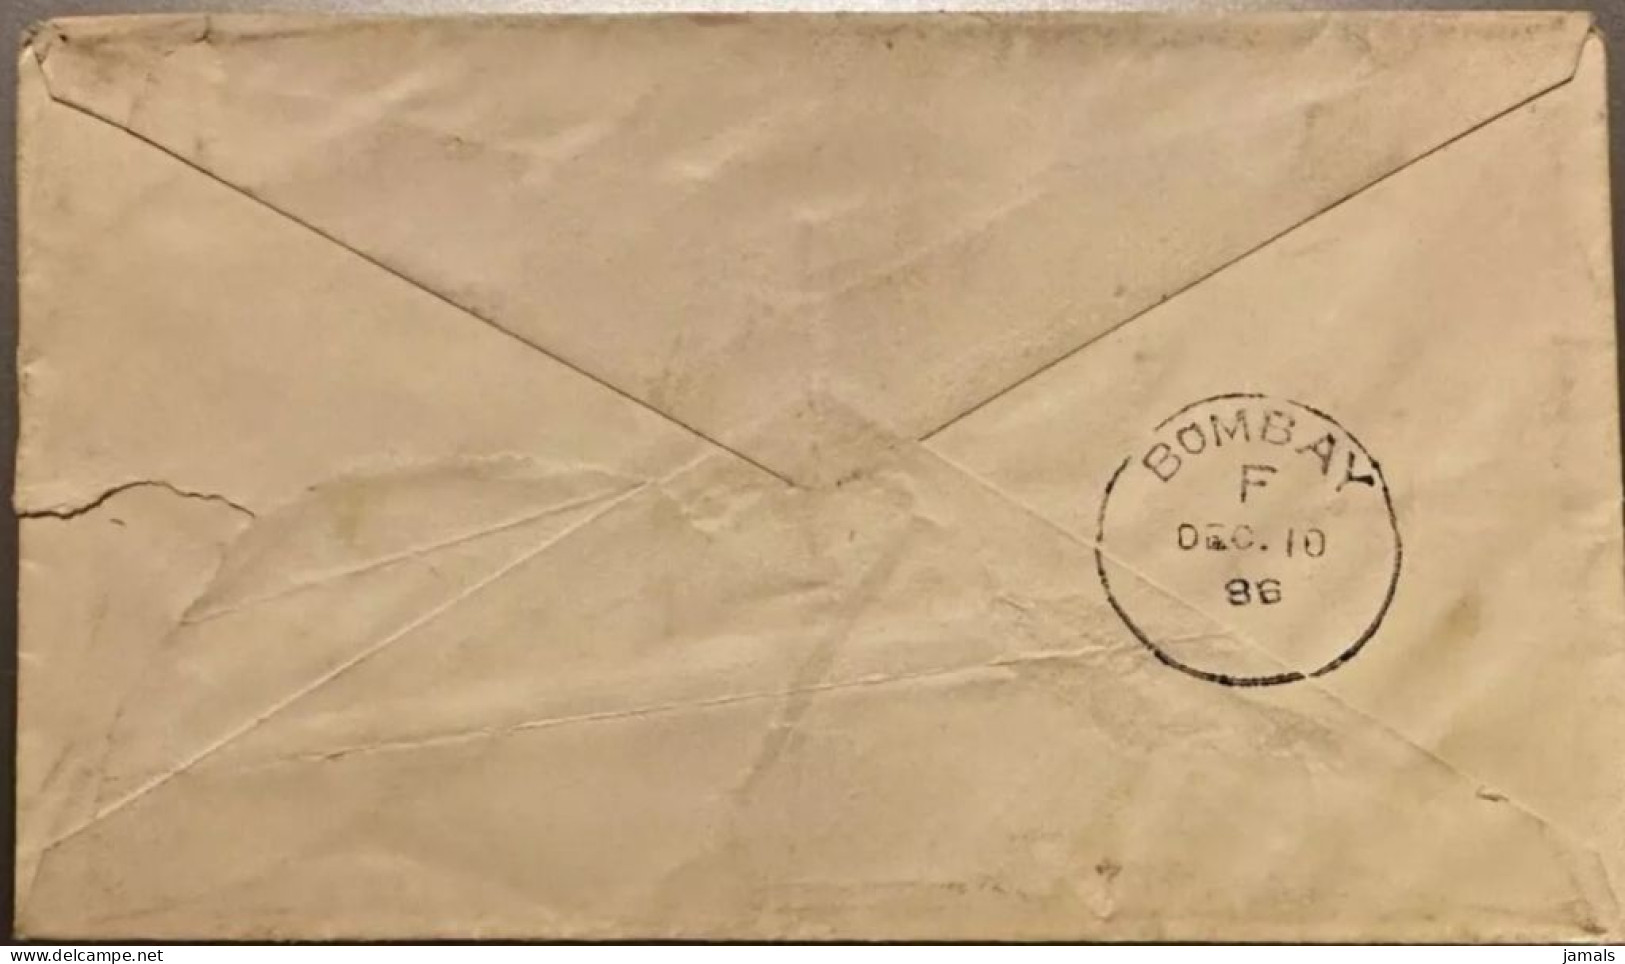 Br India Queen Victoria Postal Stationary Envelope, Madras Postmark As Scan - 1882-1901 Impero